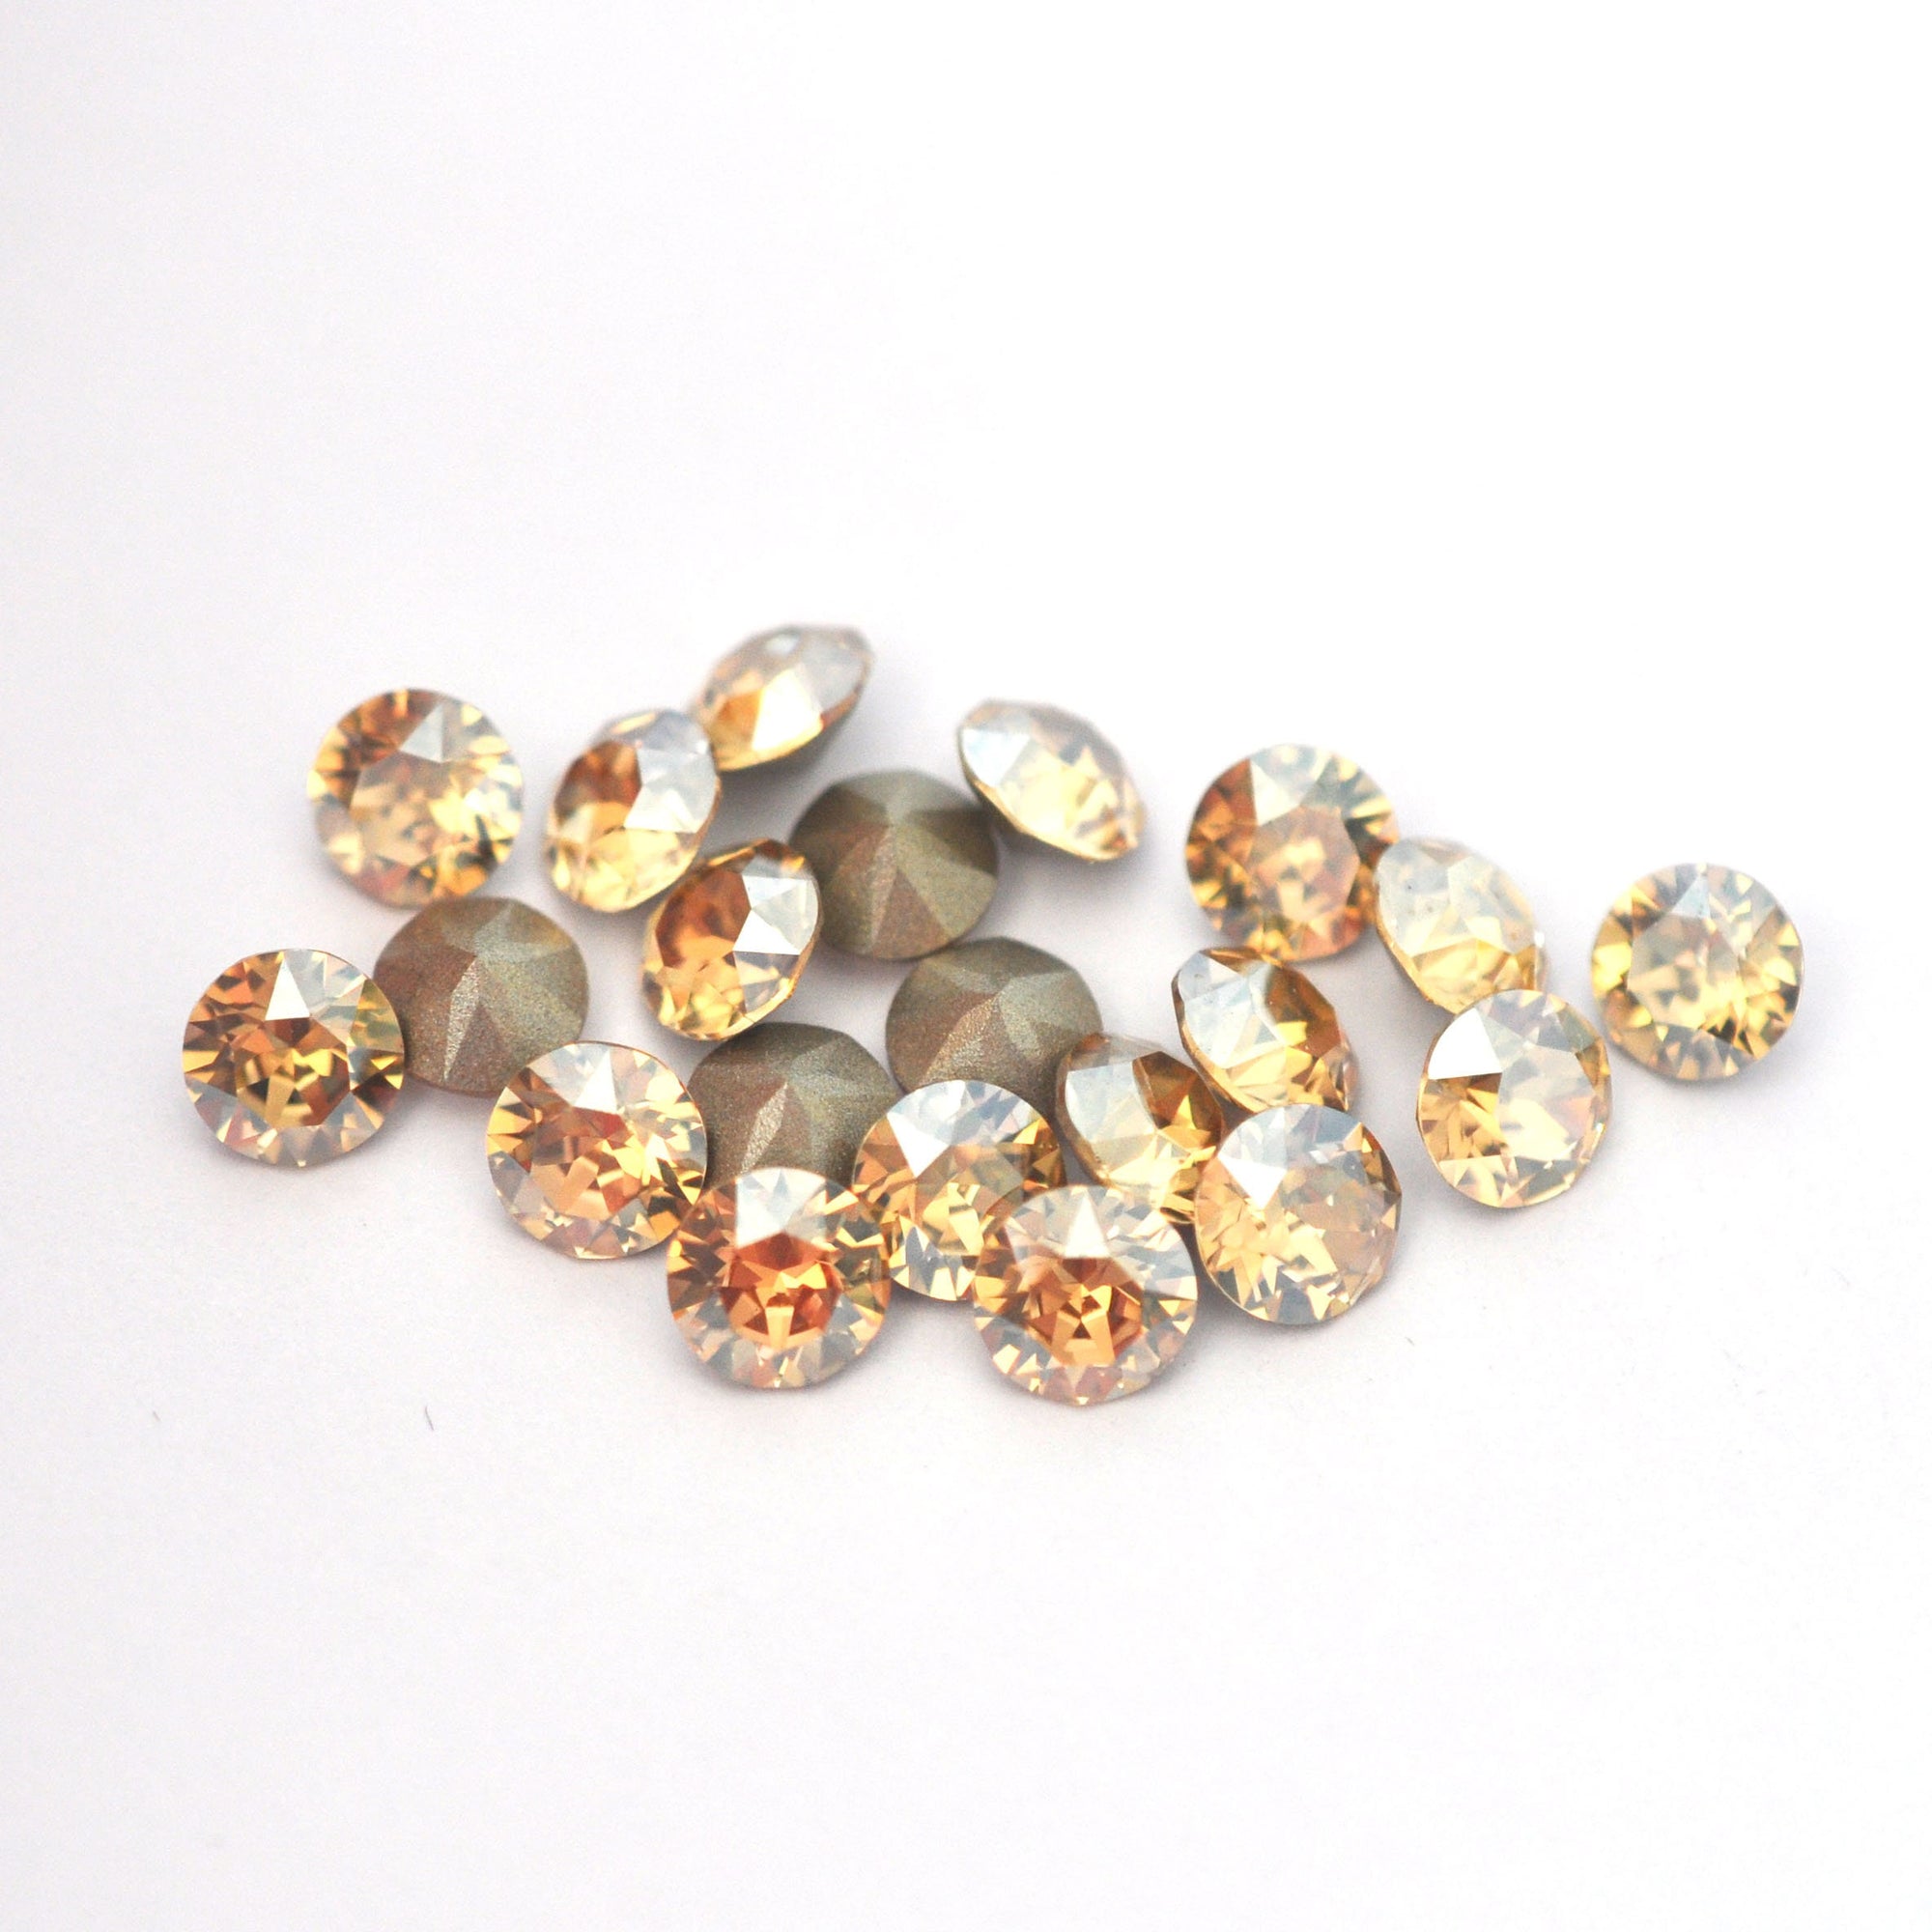 Golden Shadow 1088 Pointed Back Chaton Barton Crystal 29ss, 6mm